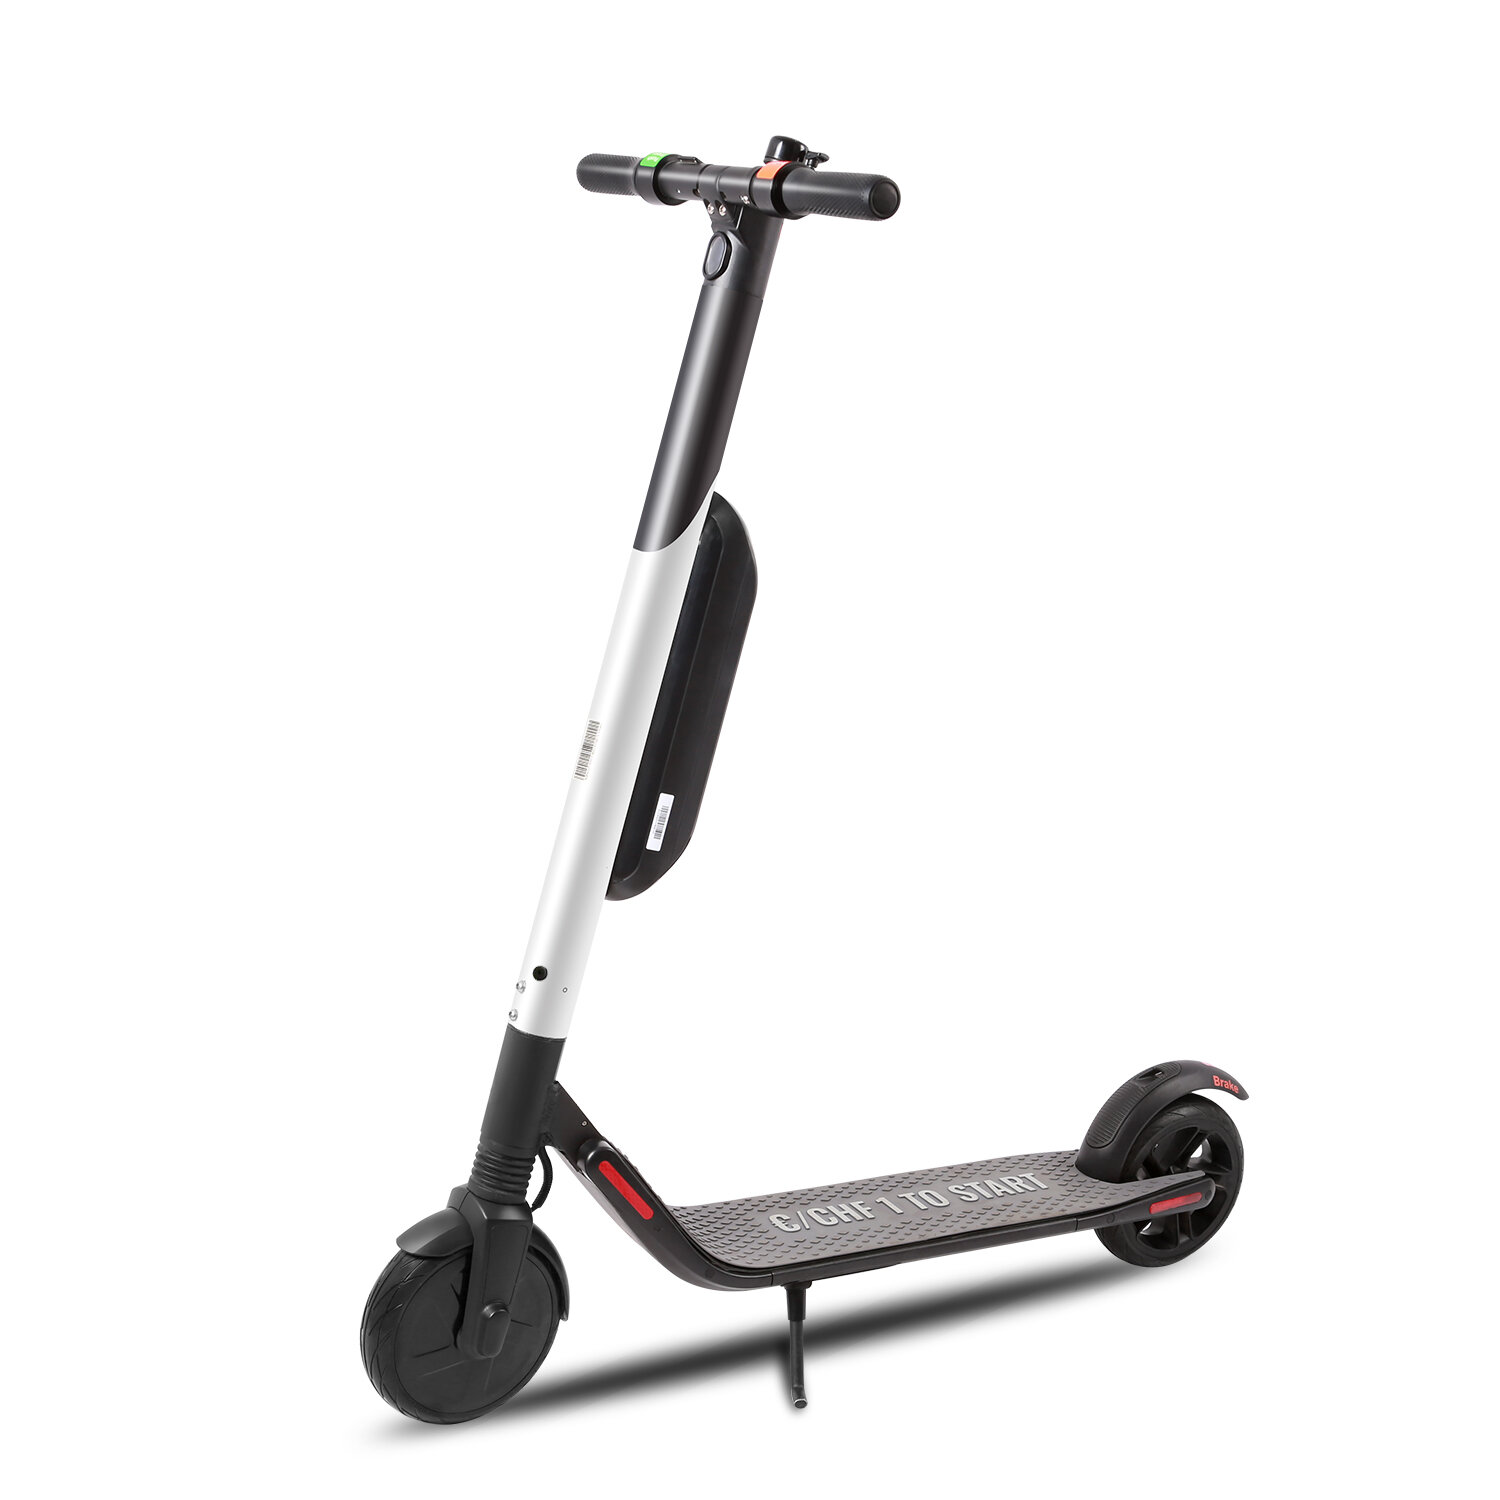 best price,es4,36v,10.4ah,350w,9.3inch,electric,scooter,eu,coupon,price,discount